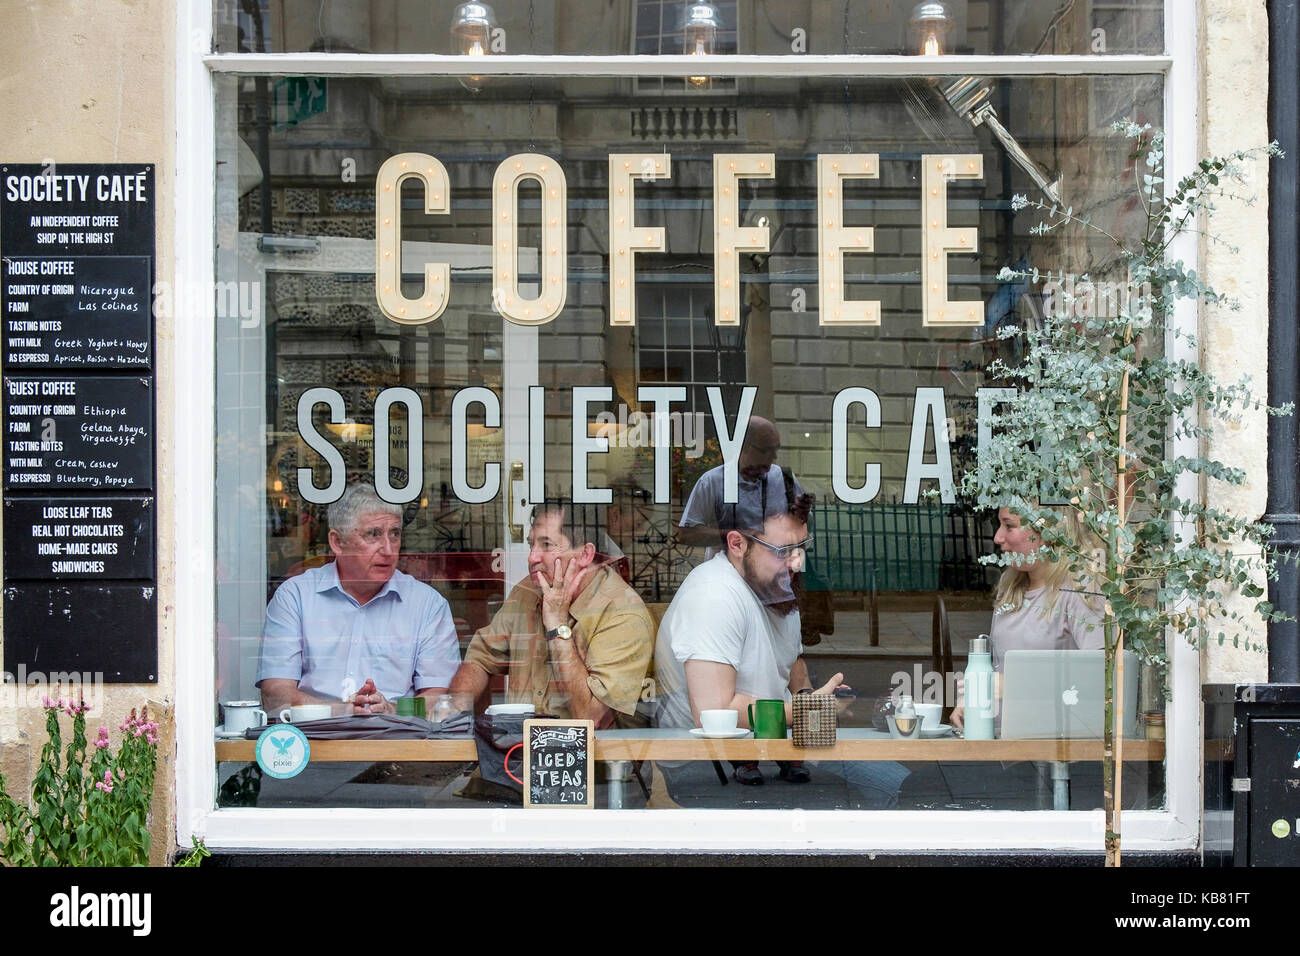 Customers drinking coffee are pictured sitting at the window of a Coffee society cafe /  bar shop in Bath, Somerset, England, UK Stock Photo